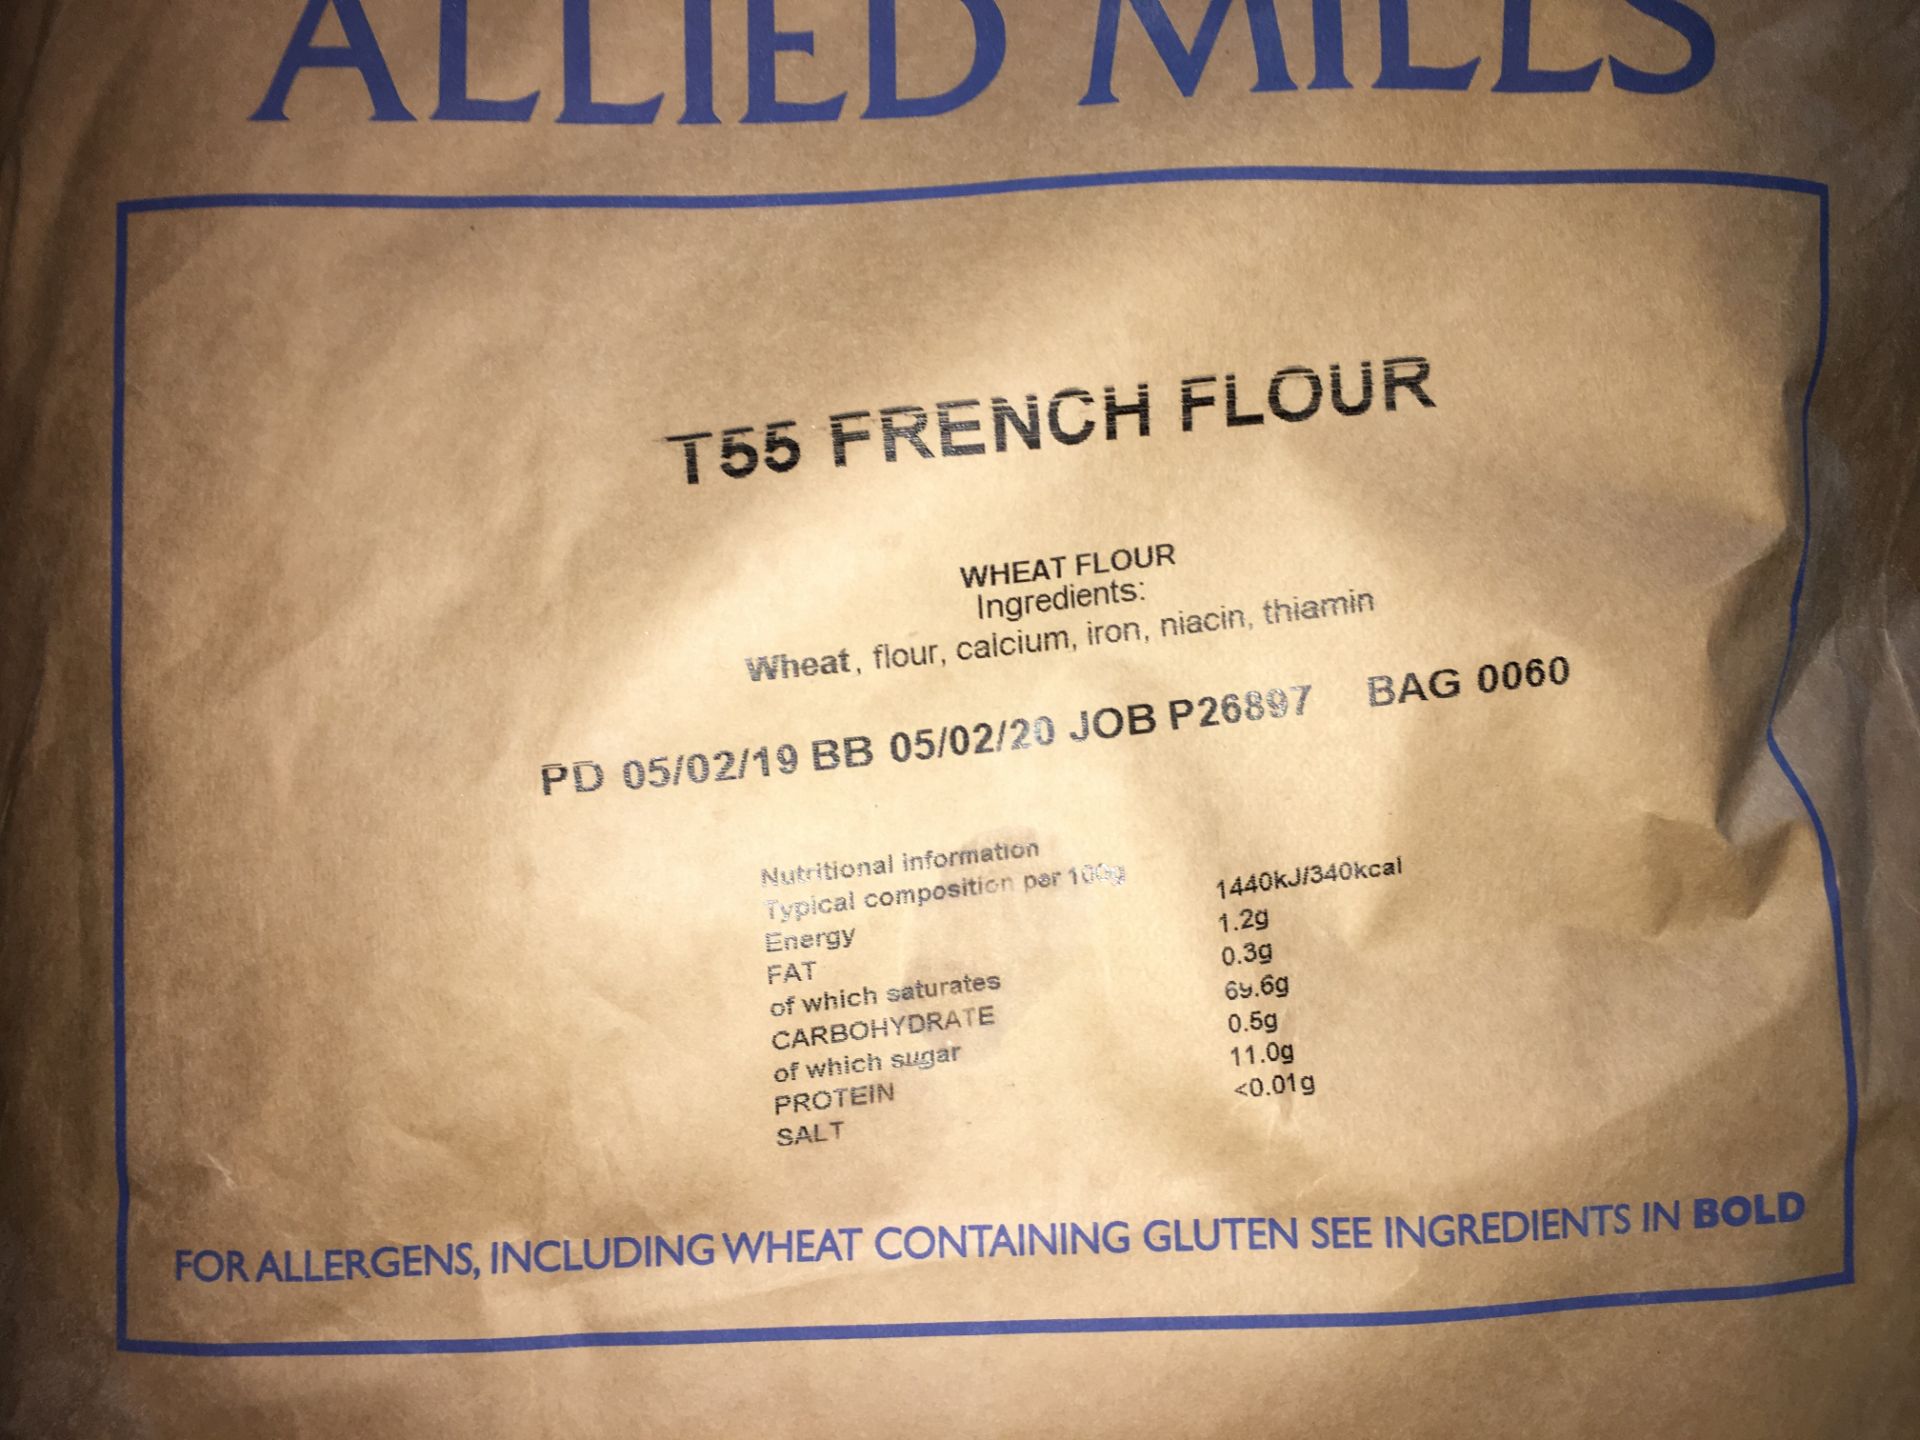 18 x 16kg Bags of Allied Mills T55 French Flour - Image 3 of 3